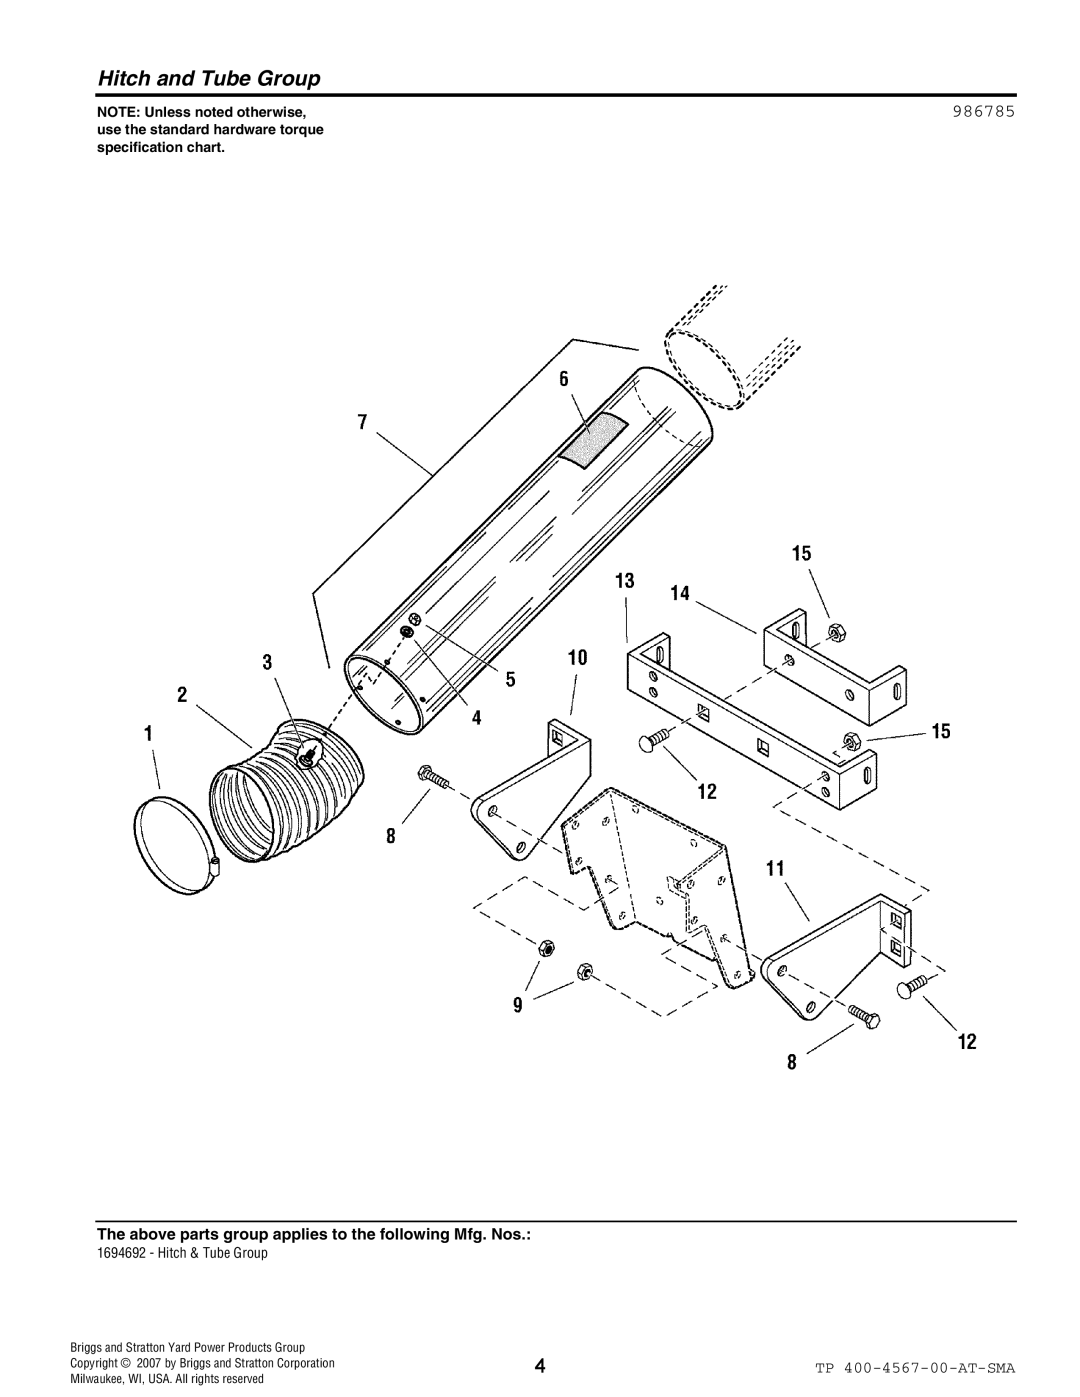 Snapper 4567 Hitch and Tube Group, 986785, NOTE Unless noted otherwise, Briggs and Stratton Yard Power Products Group 